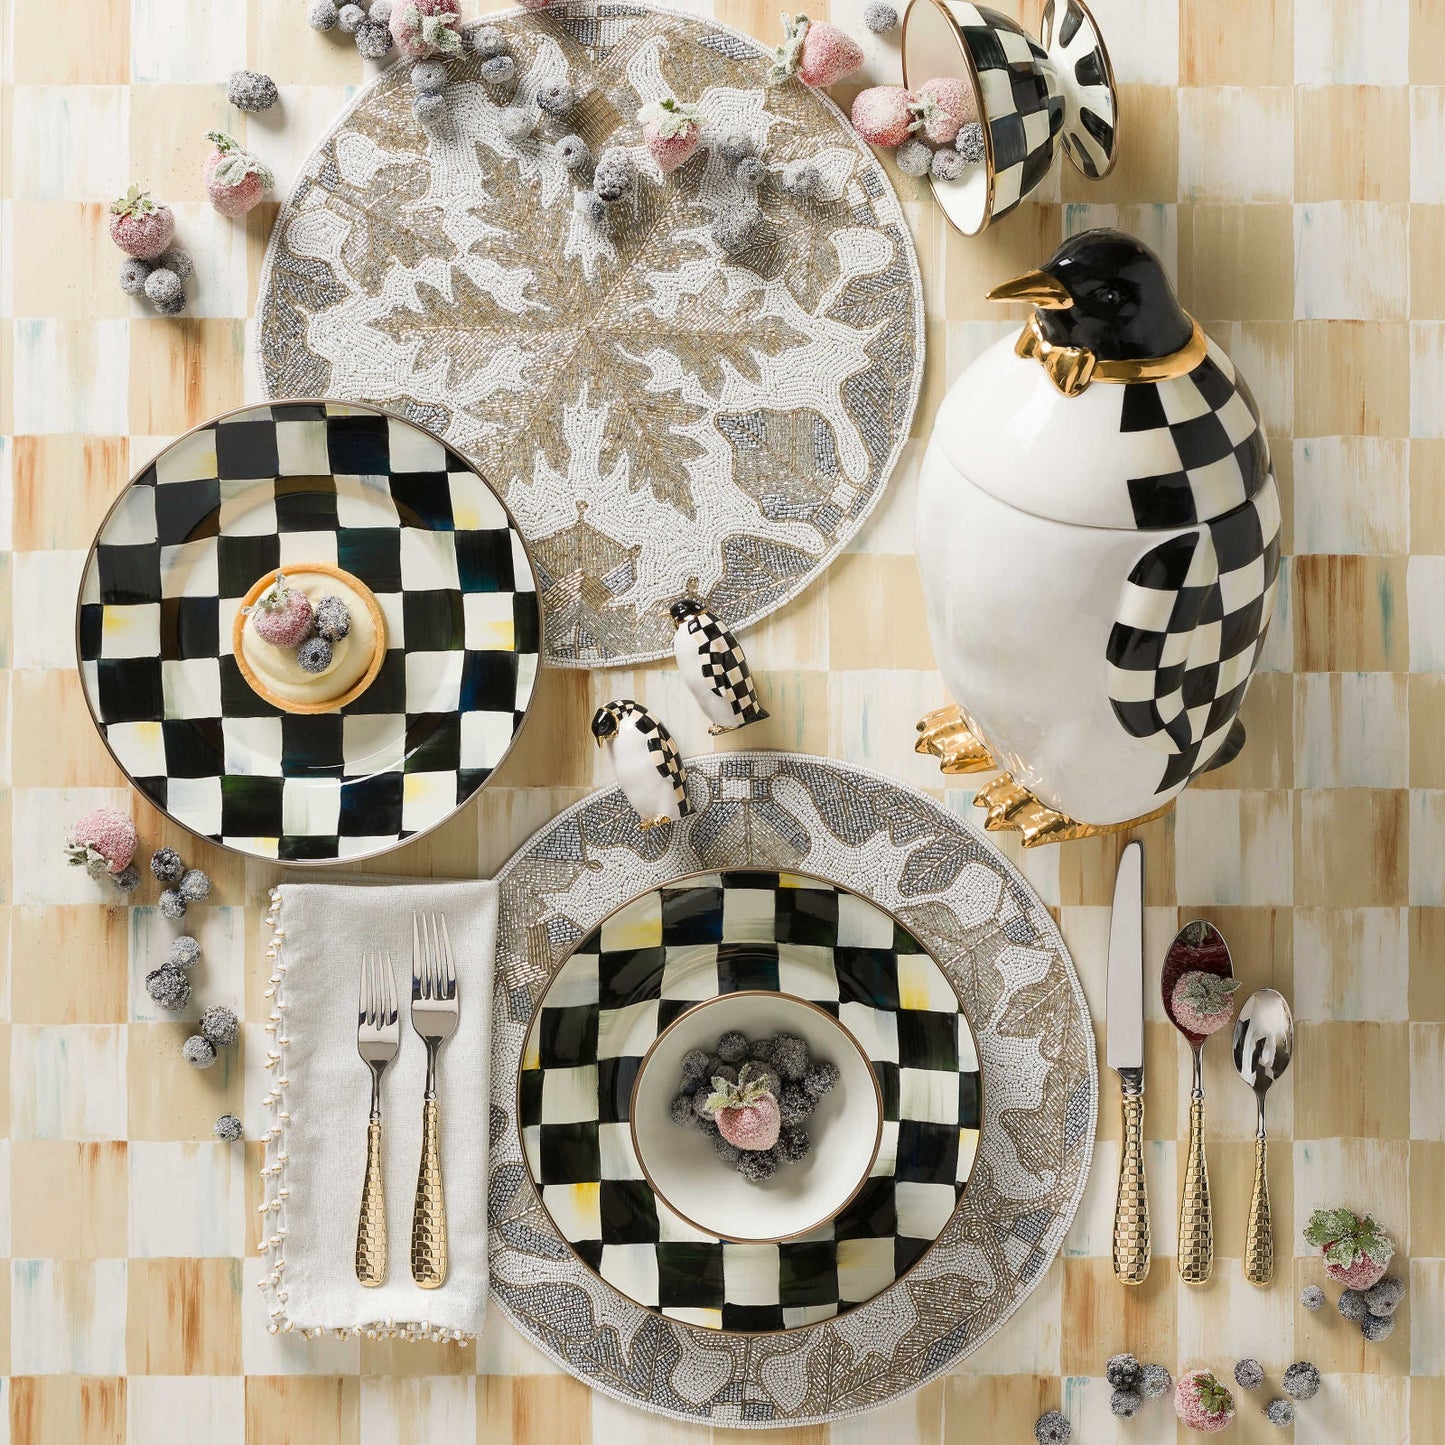 Luxury Dining - Courtly Check Enamel Dinner Plate by Mackenzie Childs - |VESIMI Design| Luxury and Rustic bathrooms online